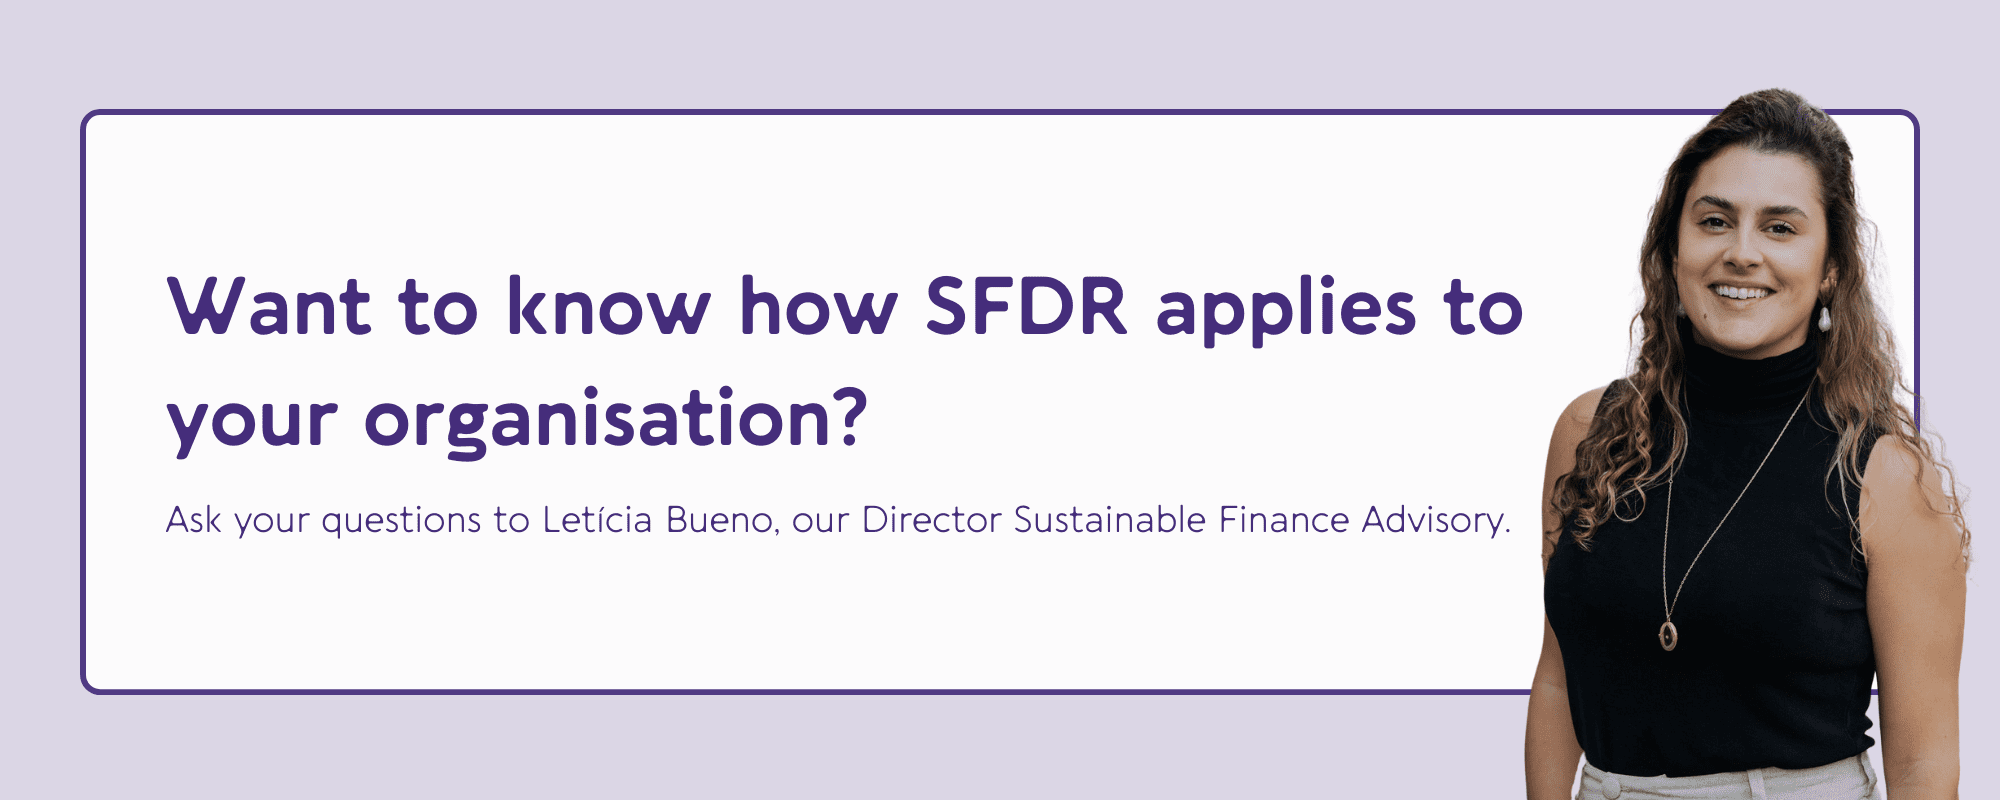 Want to know how SFDR applies to your organisation?